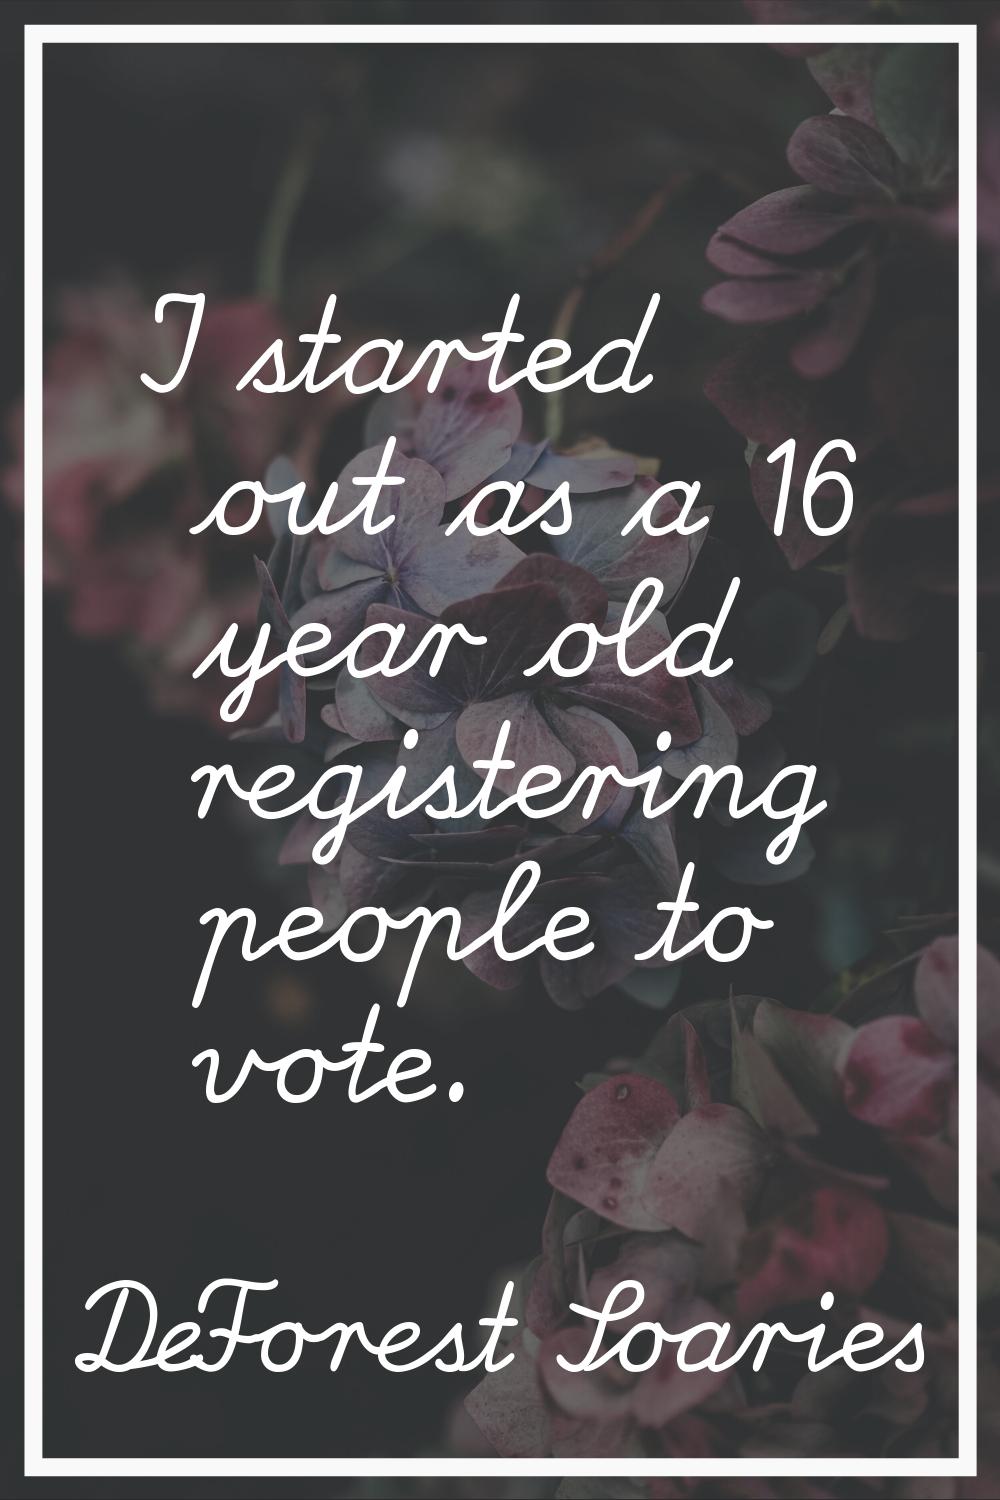 I started out as a 16 year old registering people to vote.